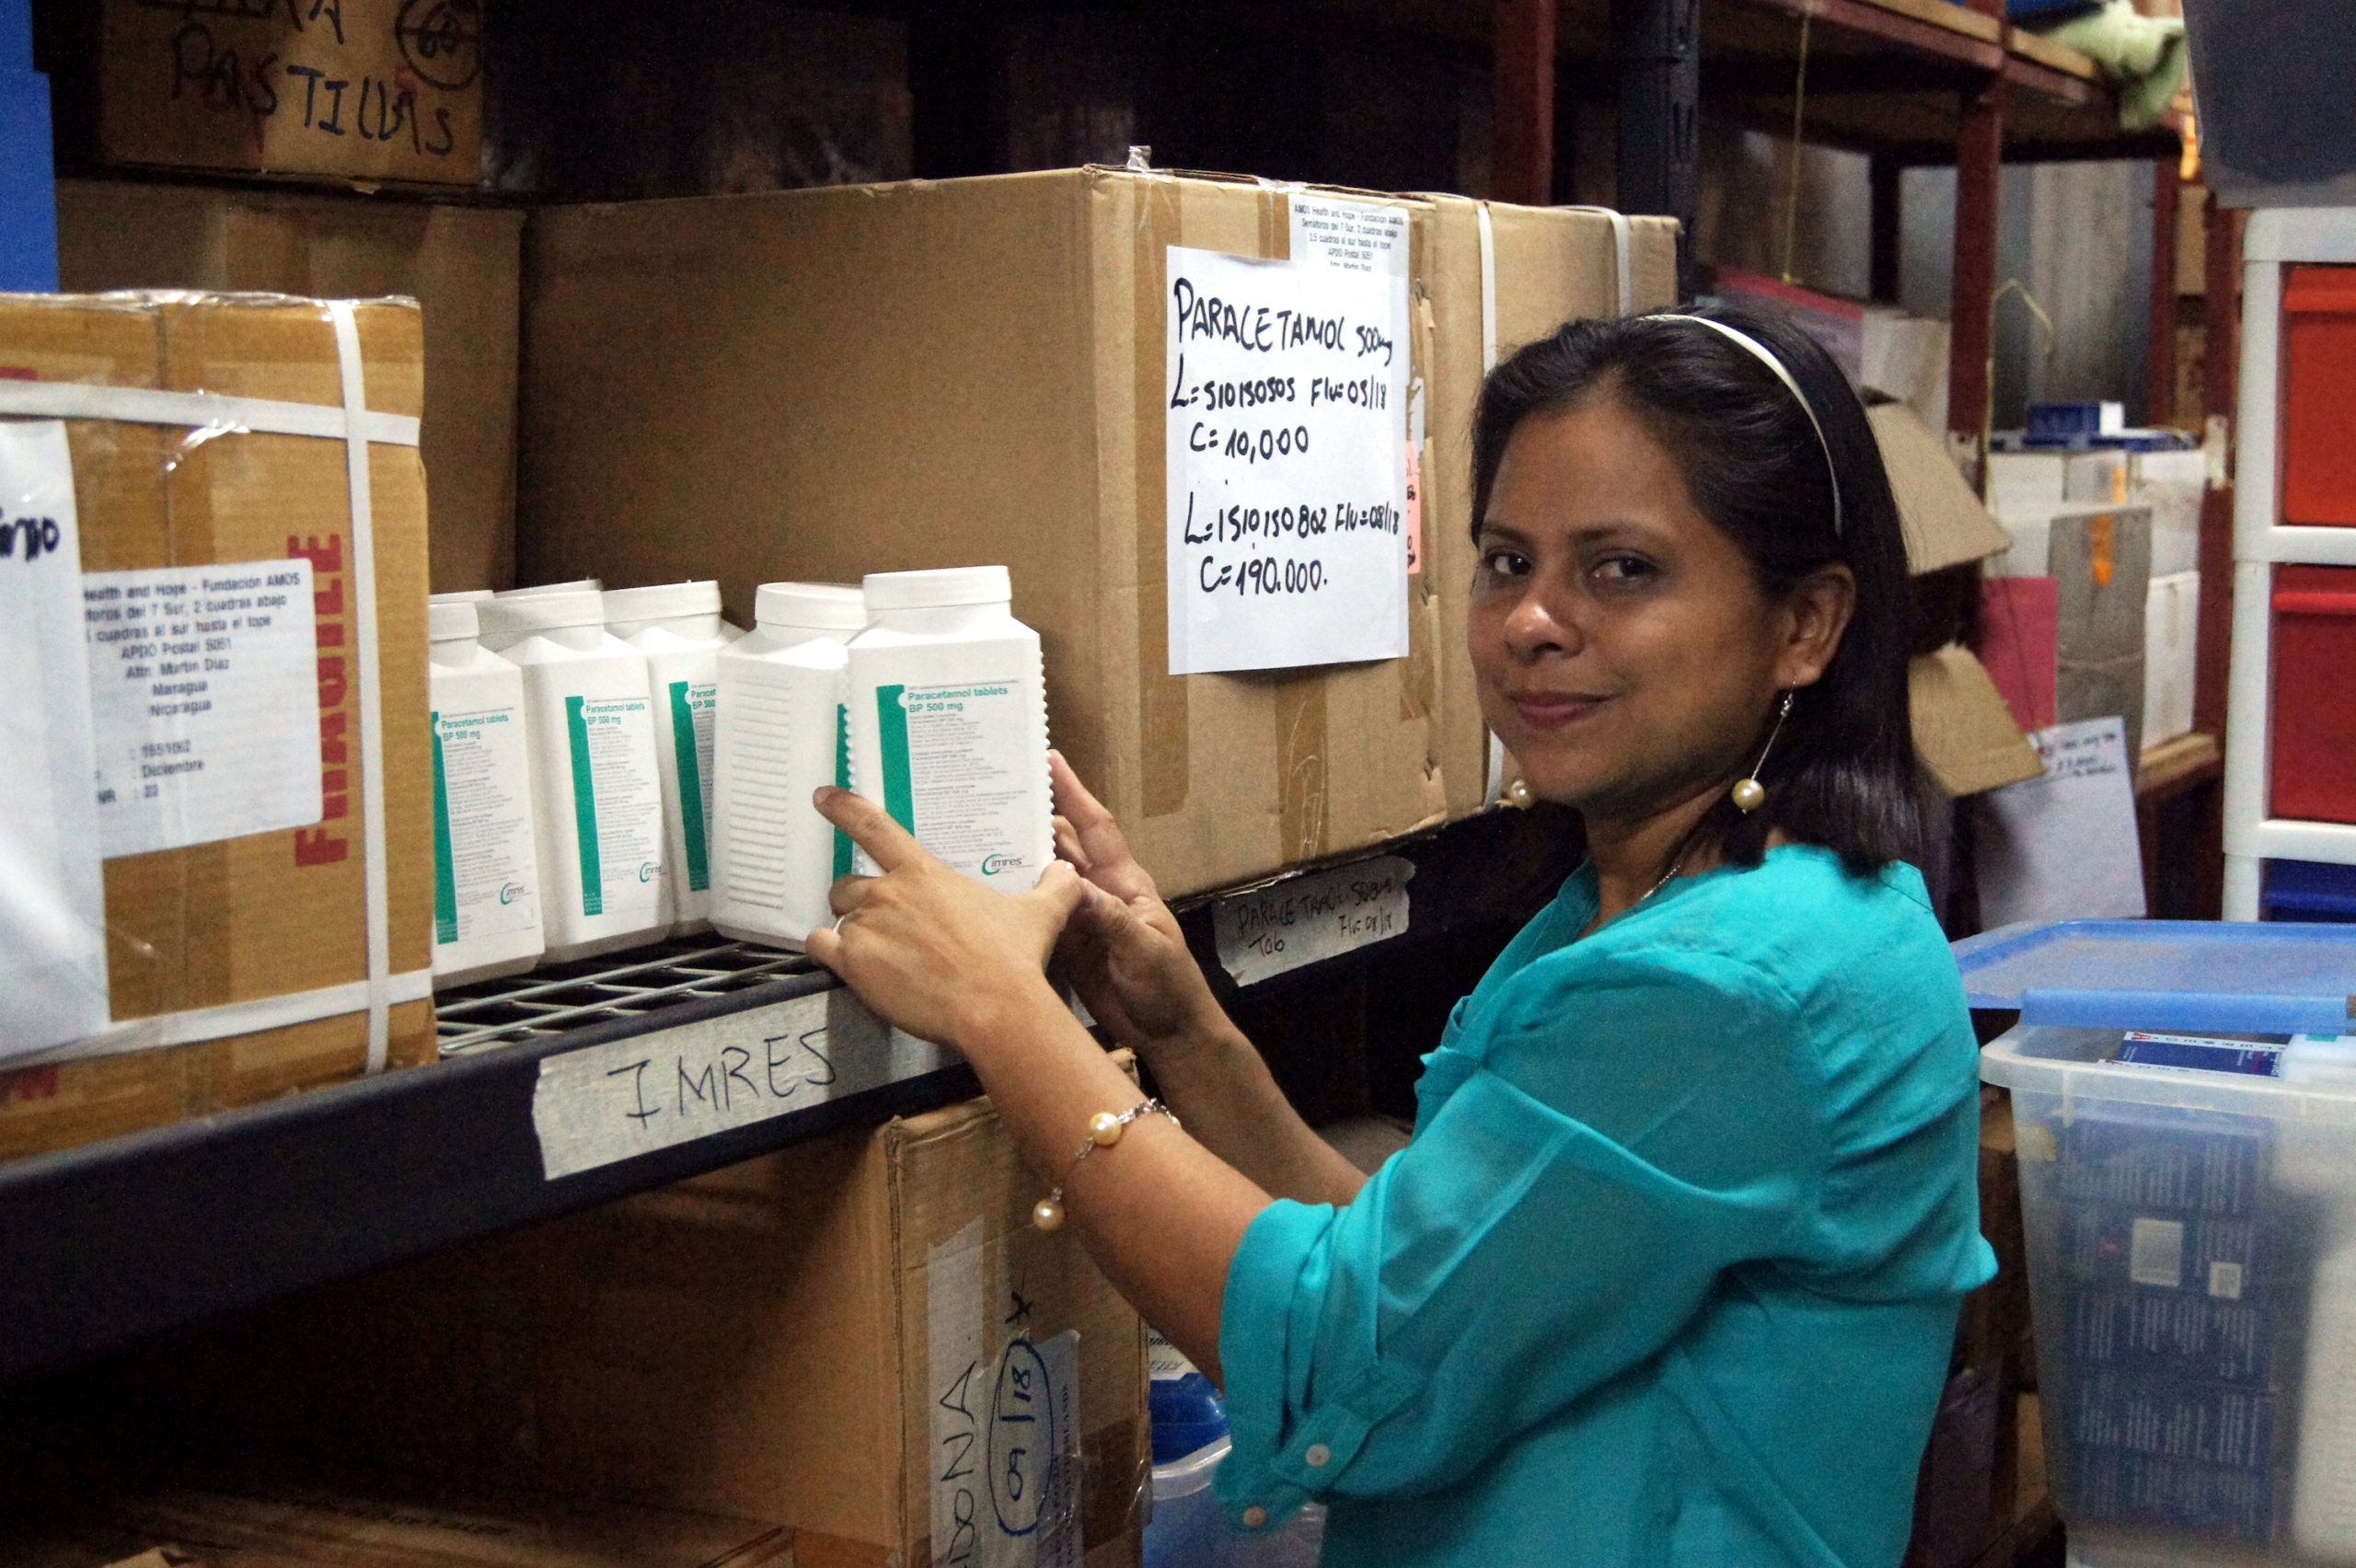 A woman next to pharmaceutical supplies, including family planning supplies.